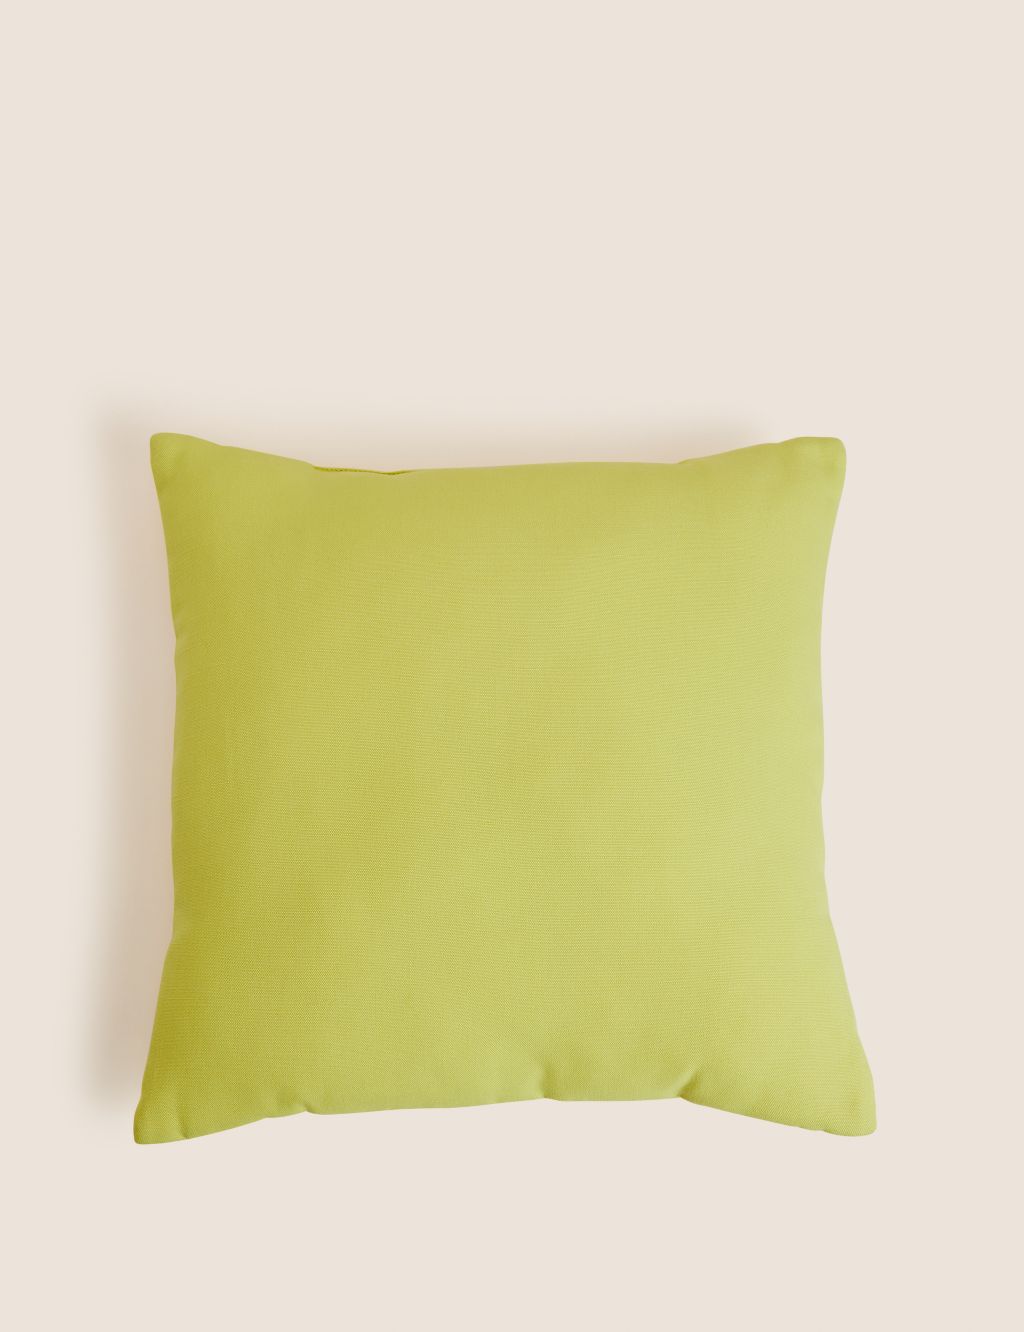 Set of 2 Outdoor Cushions image 1